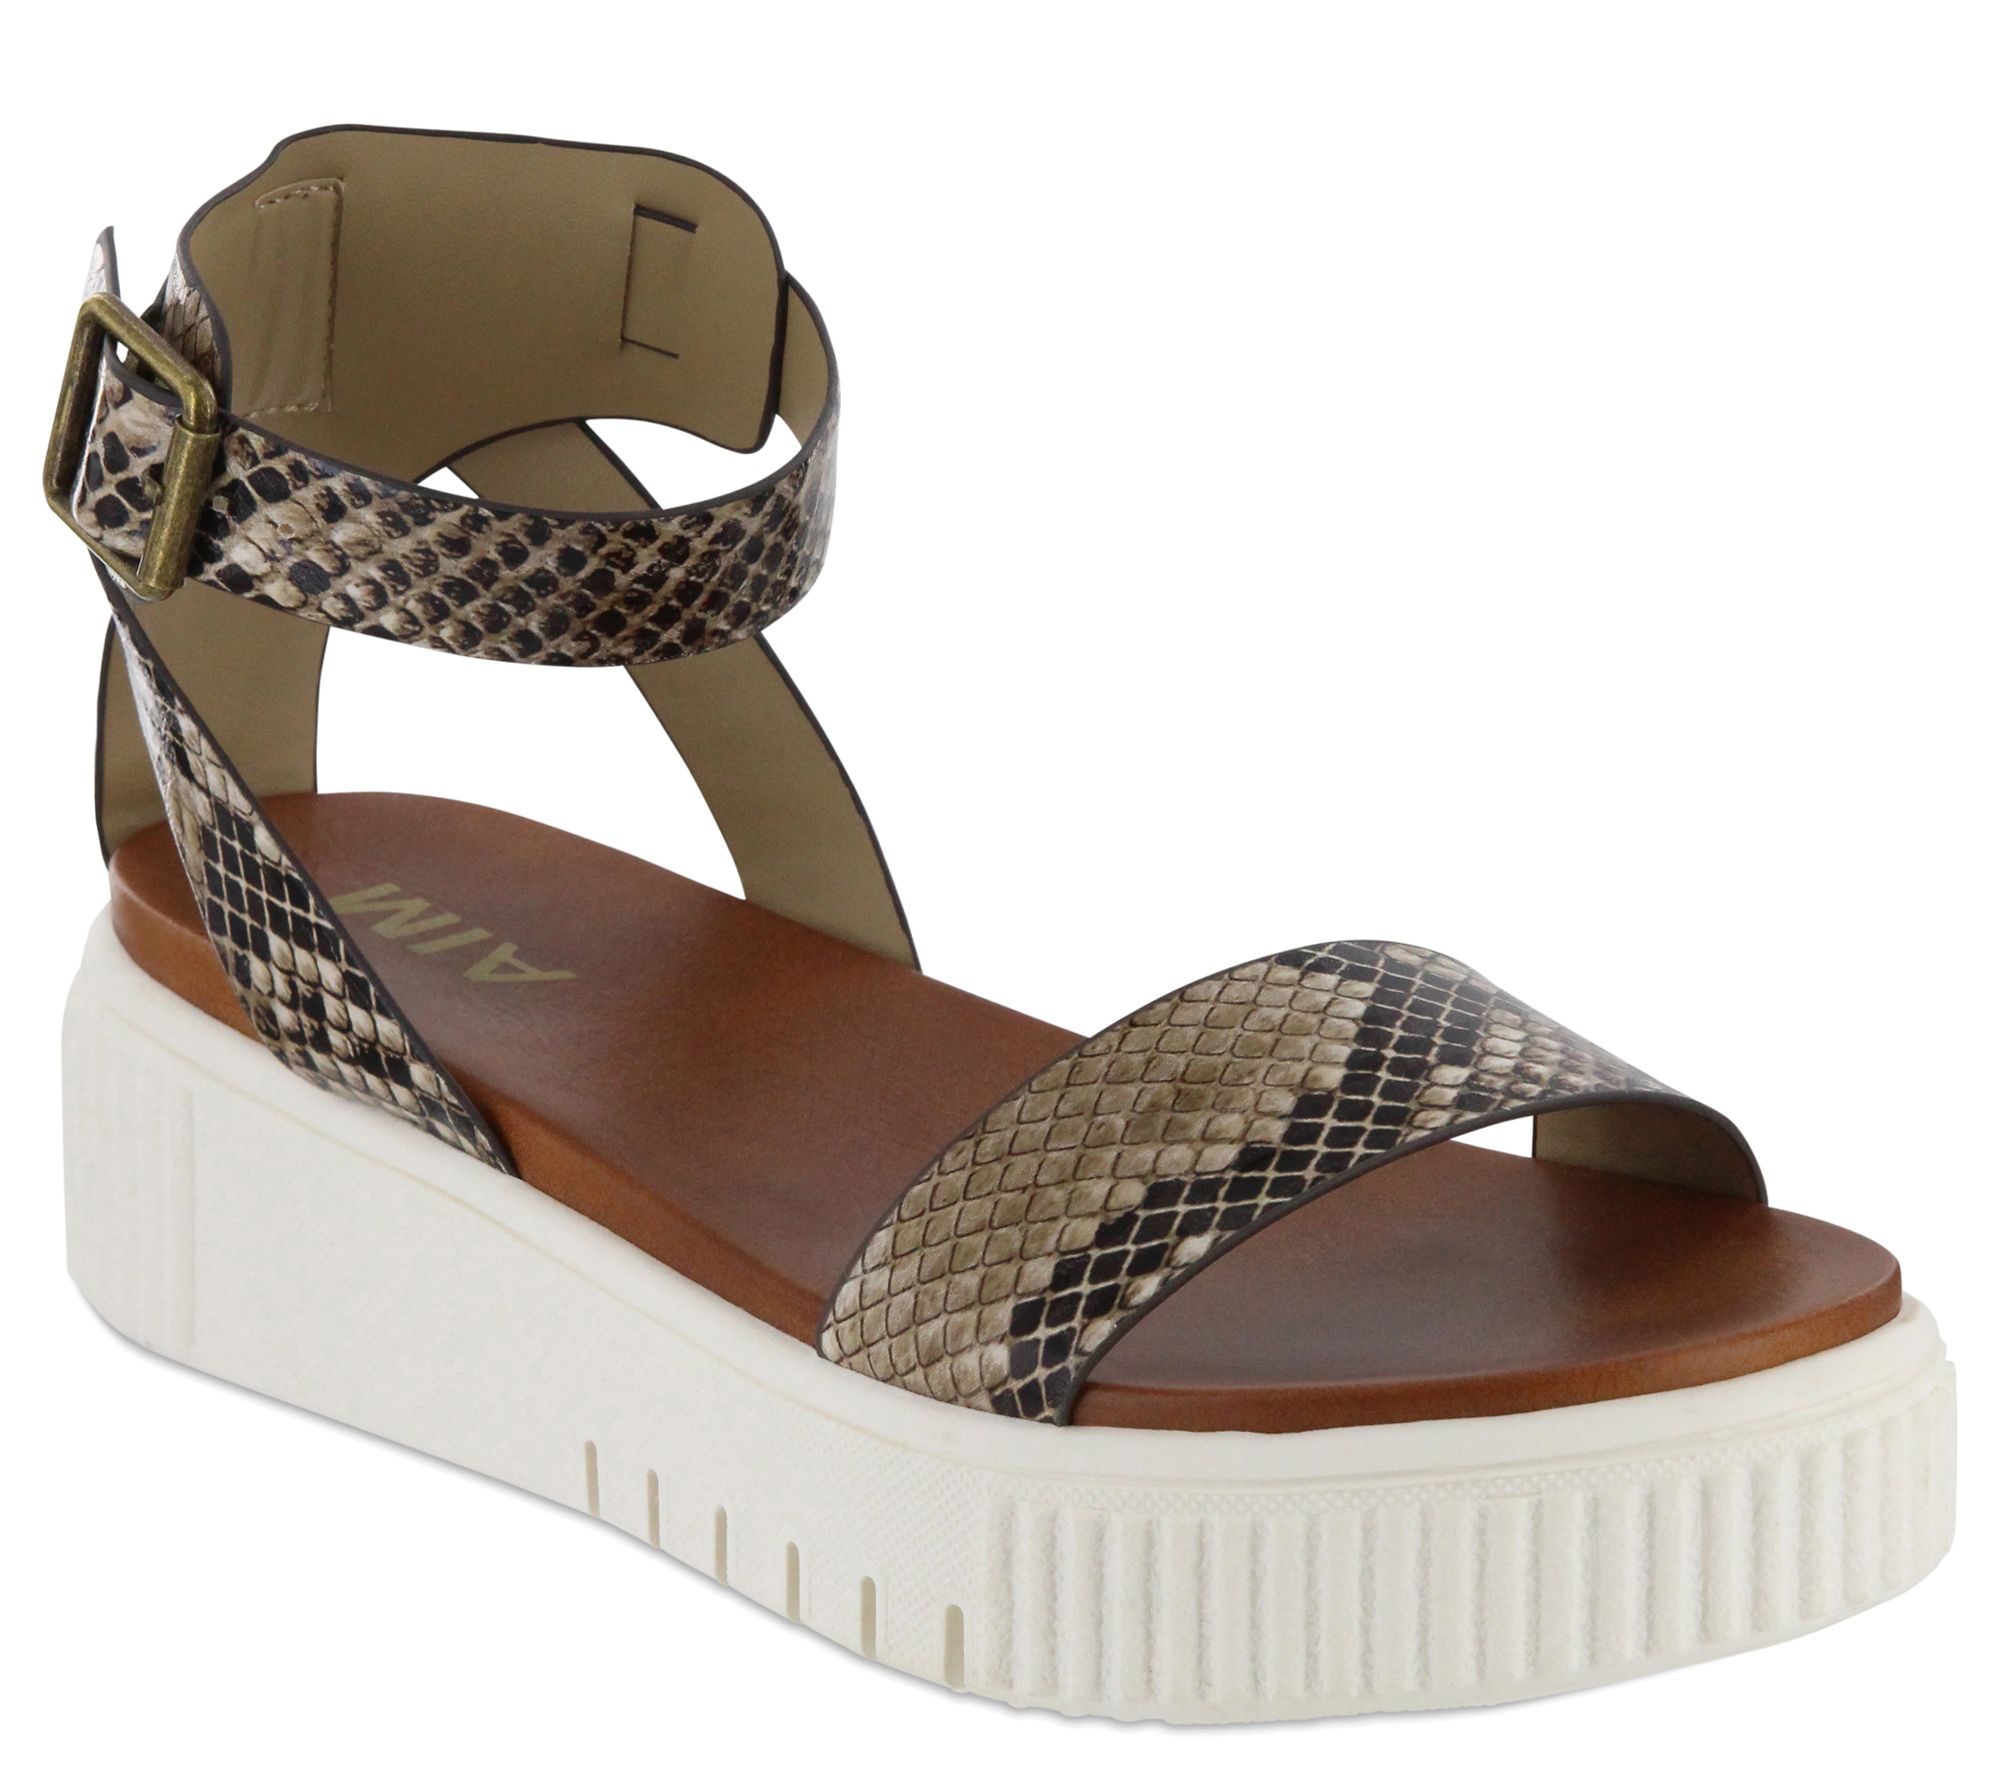 sandals with sneaker soles